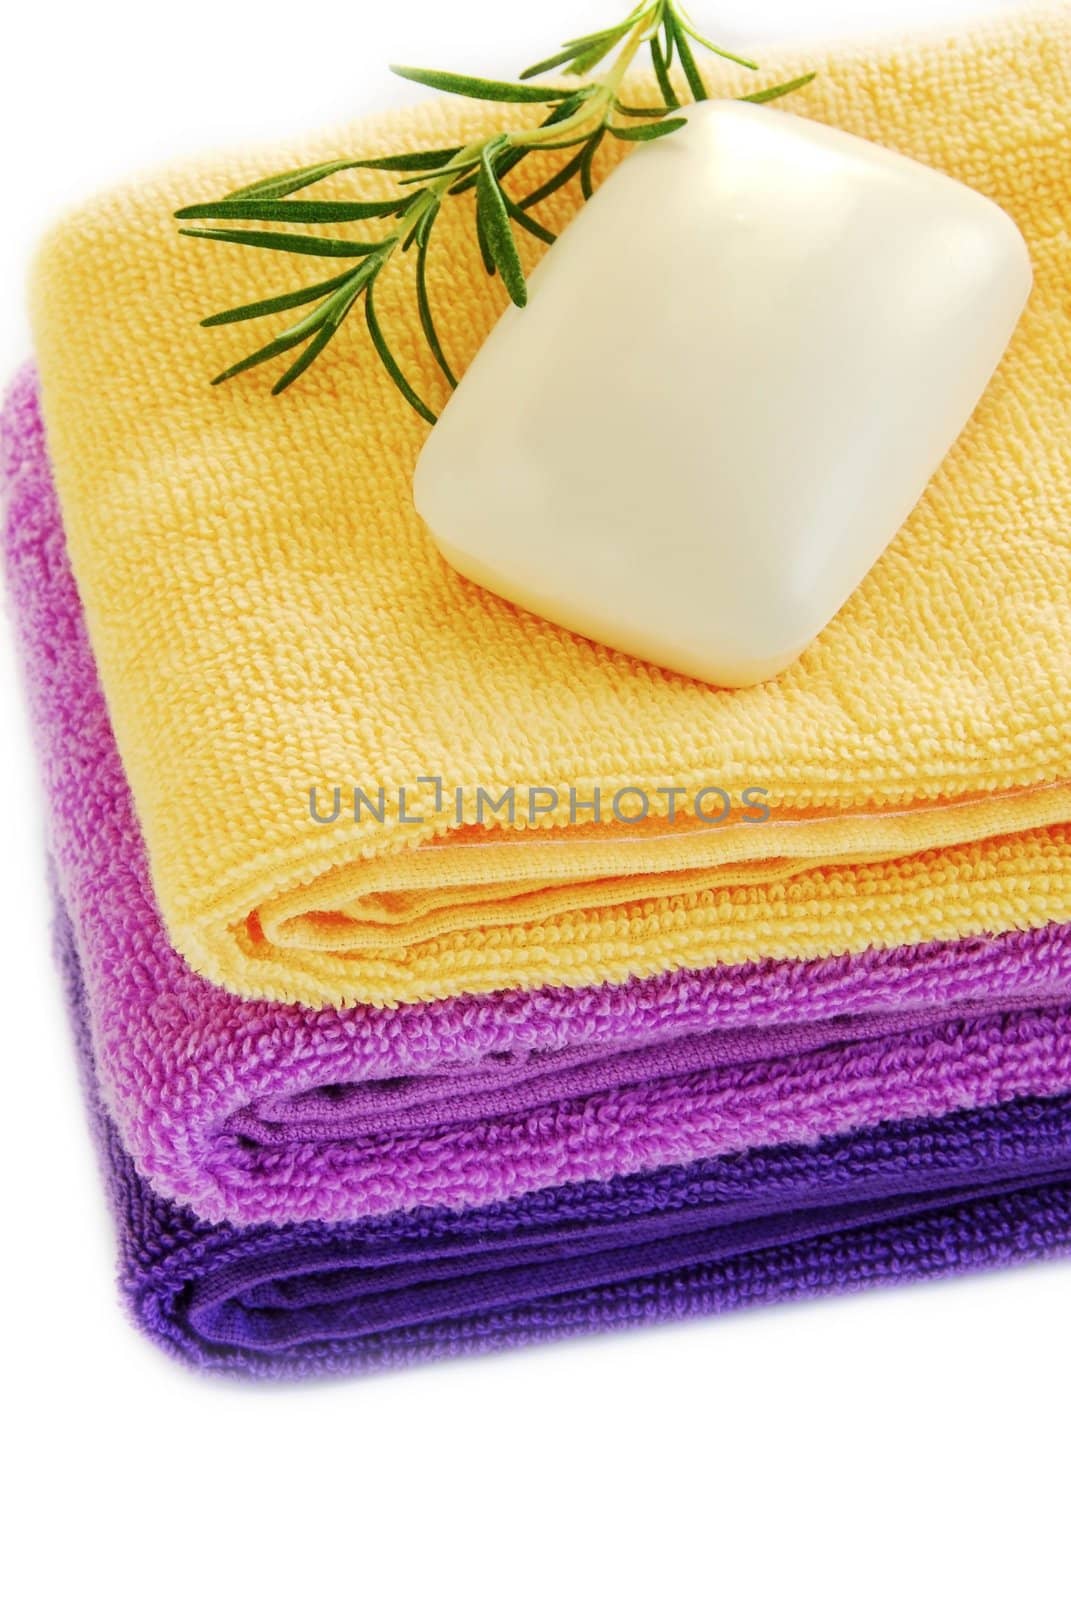 pile of colorful towels with soap and rosemary sprig over white